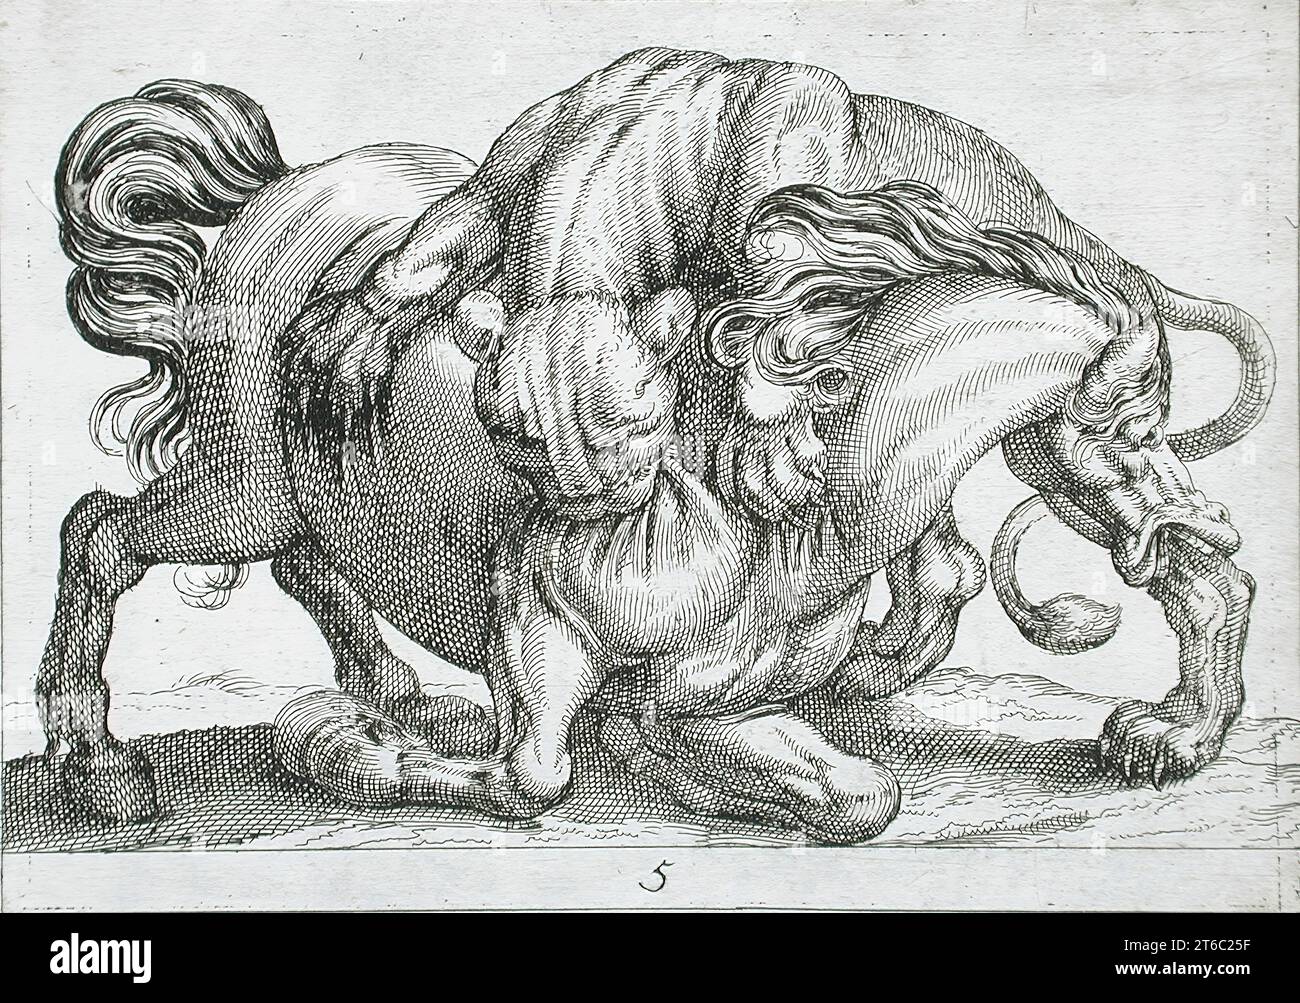 A Lion Attacking a Horse, 1610. From Battling Animals, pl. 5. Stock Photo